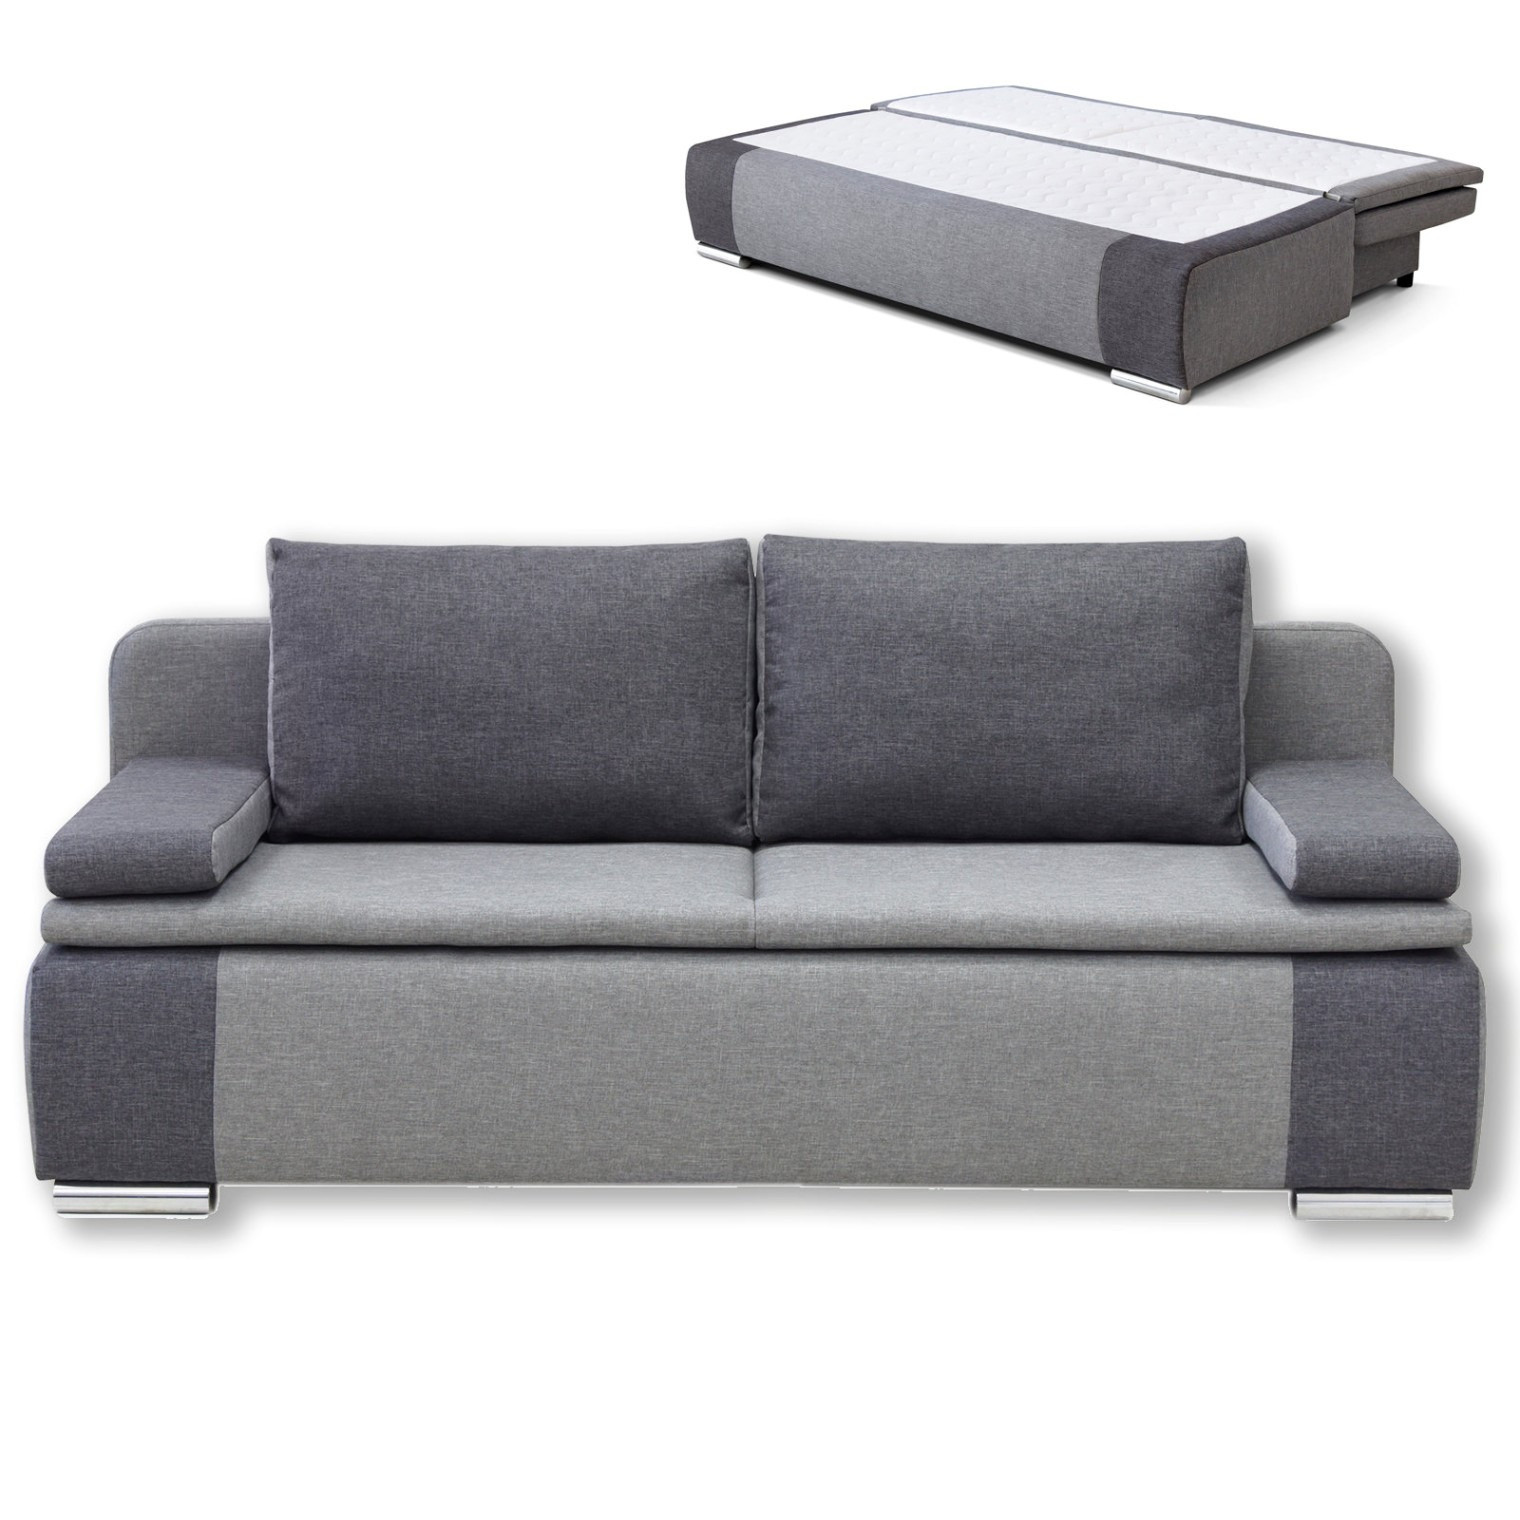 Best ideas about Serta Meredith Convertible Sofa
. Save or Pin Serta Meredith Convertible Sofa How To Use Now.